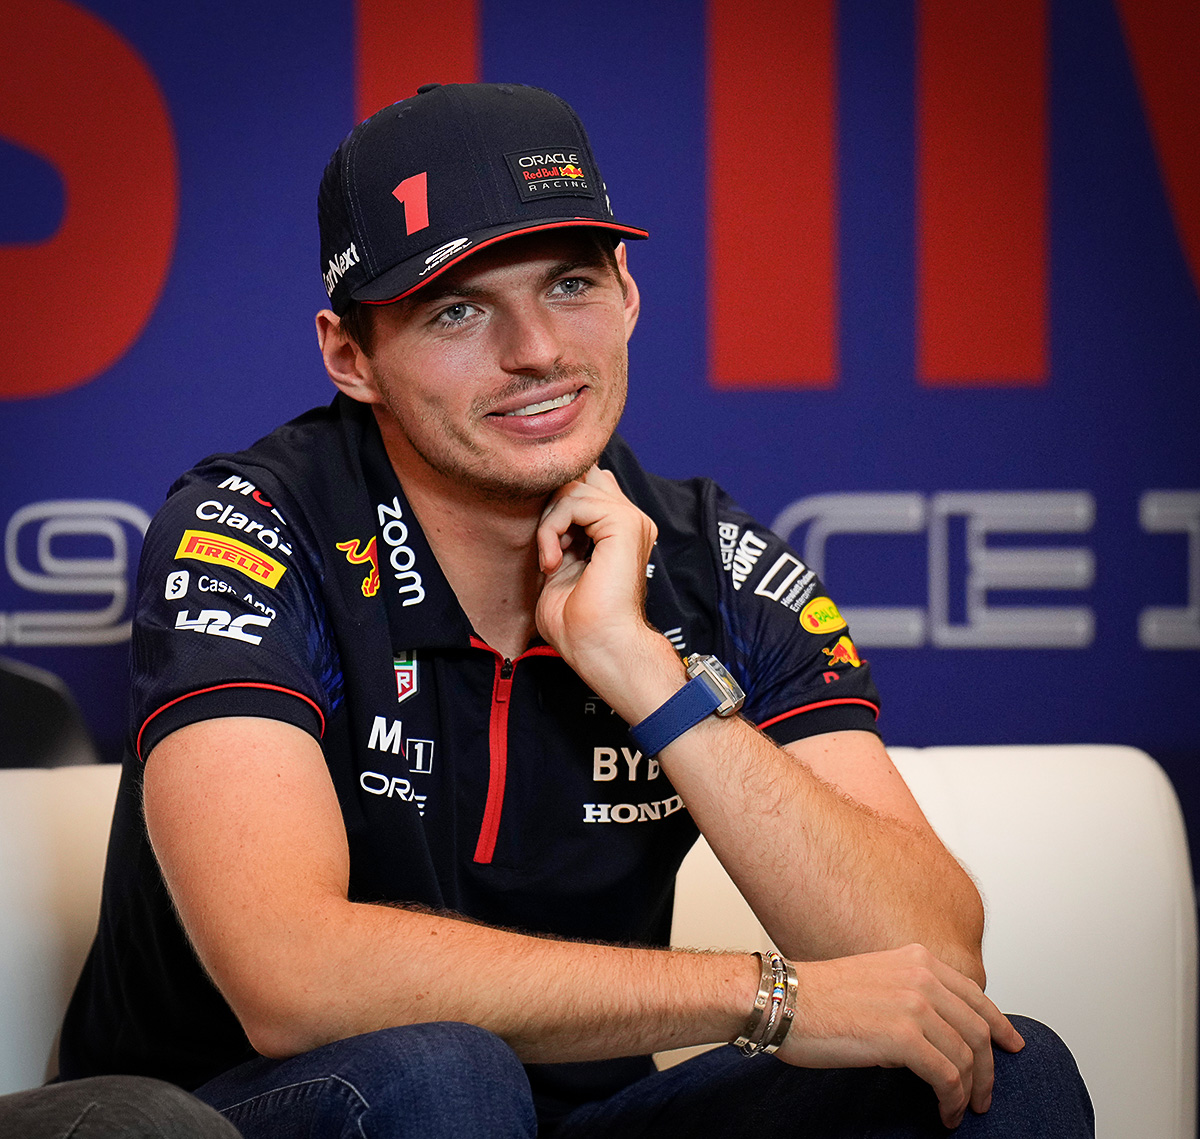 Red Bull driver Max Verstappen of the Netherlands smiles at a press conference at the Formula 1 Grand Prix in Austin, Texas. #sonyalpha #sony600mm #alpha1 #texas #formula1 #f1 #racing #cars #cota #speed #austin #circuitoftheamericas #redbull #grandprix #sportsphotograher